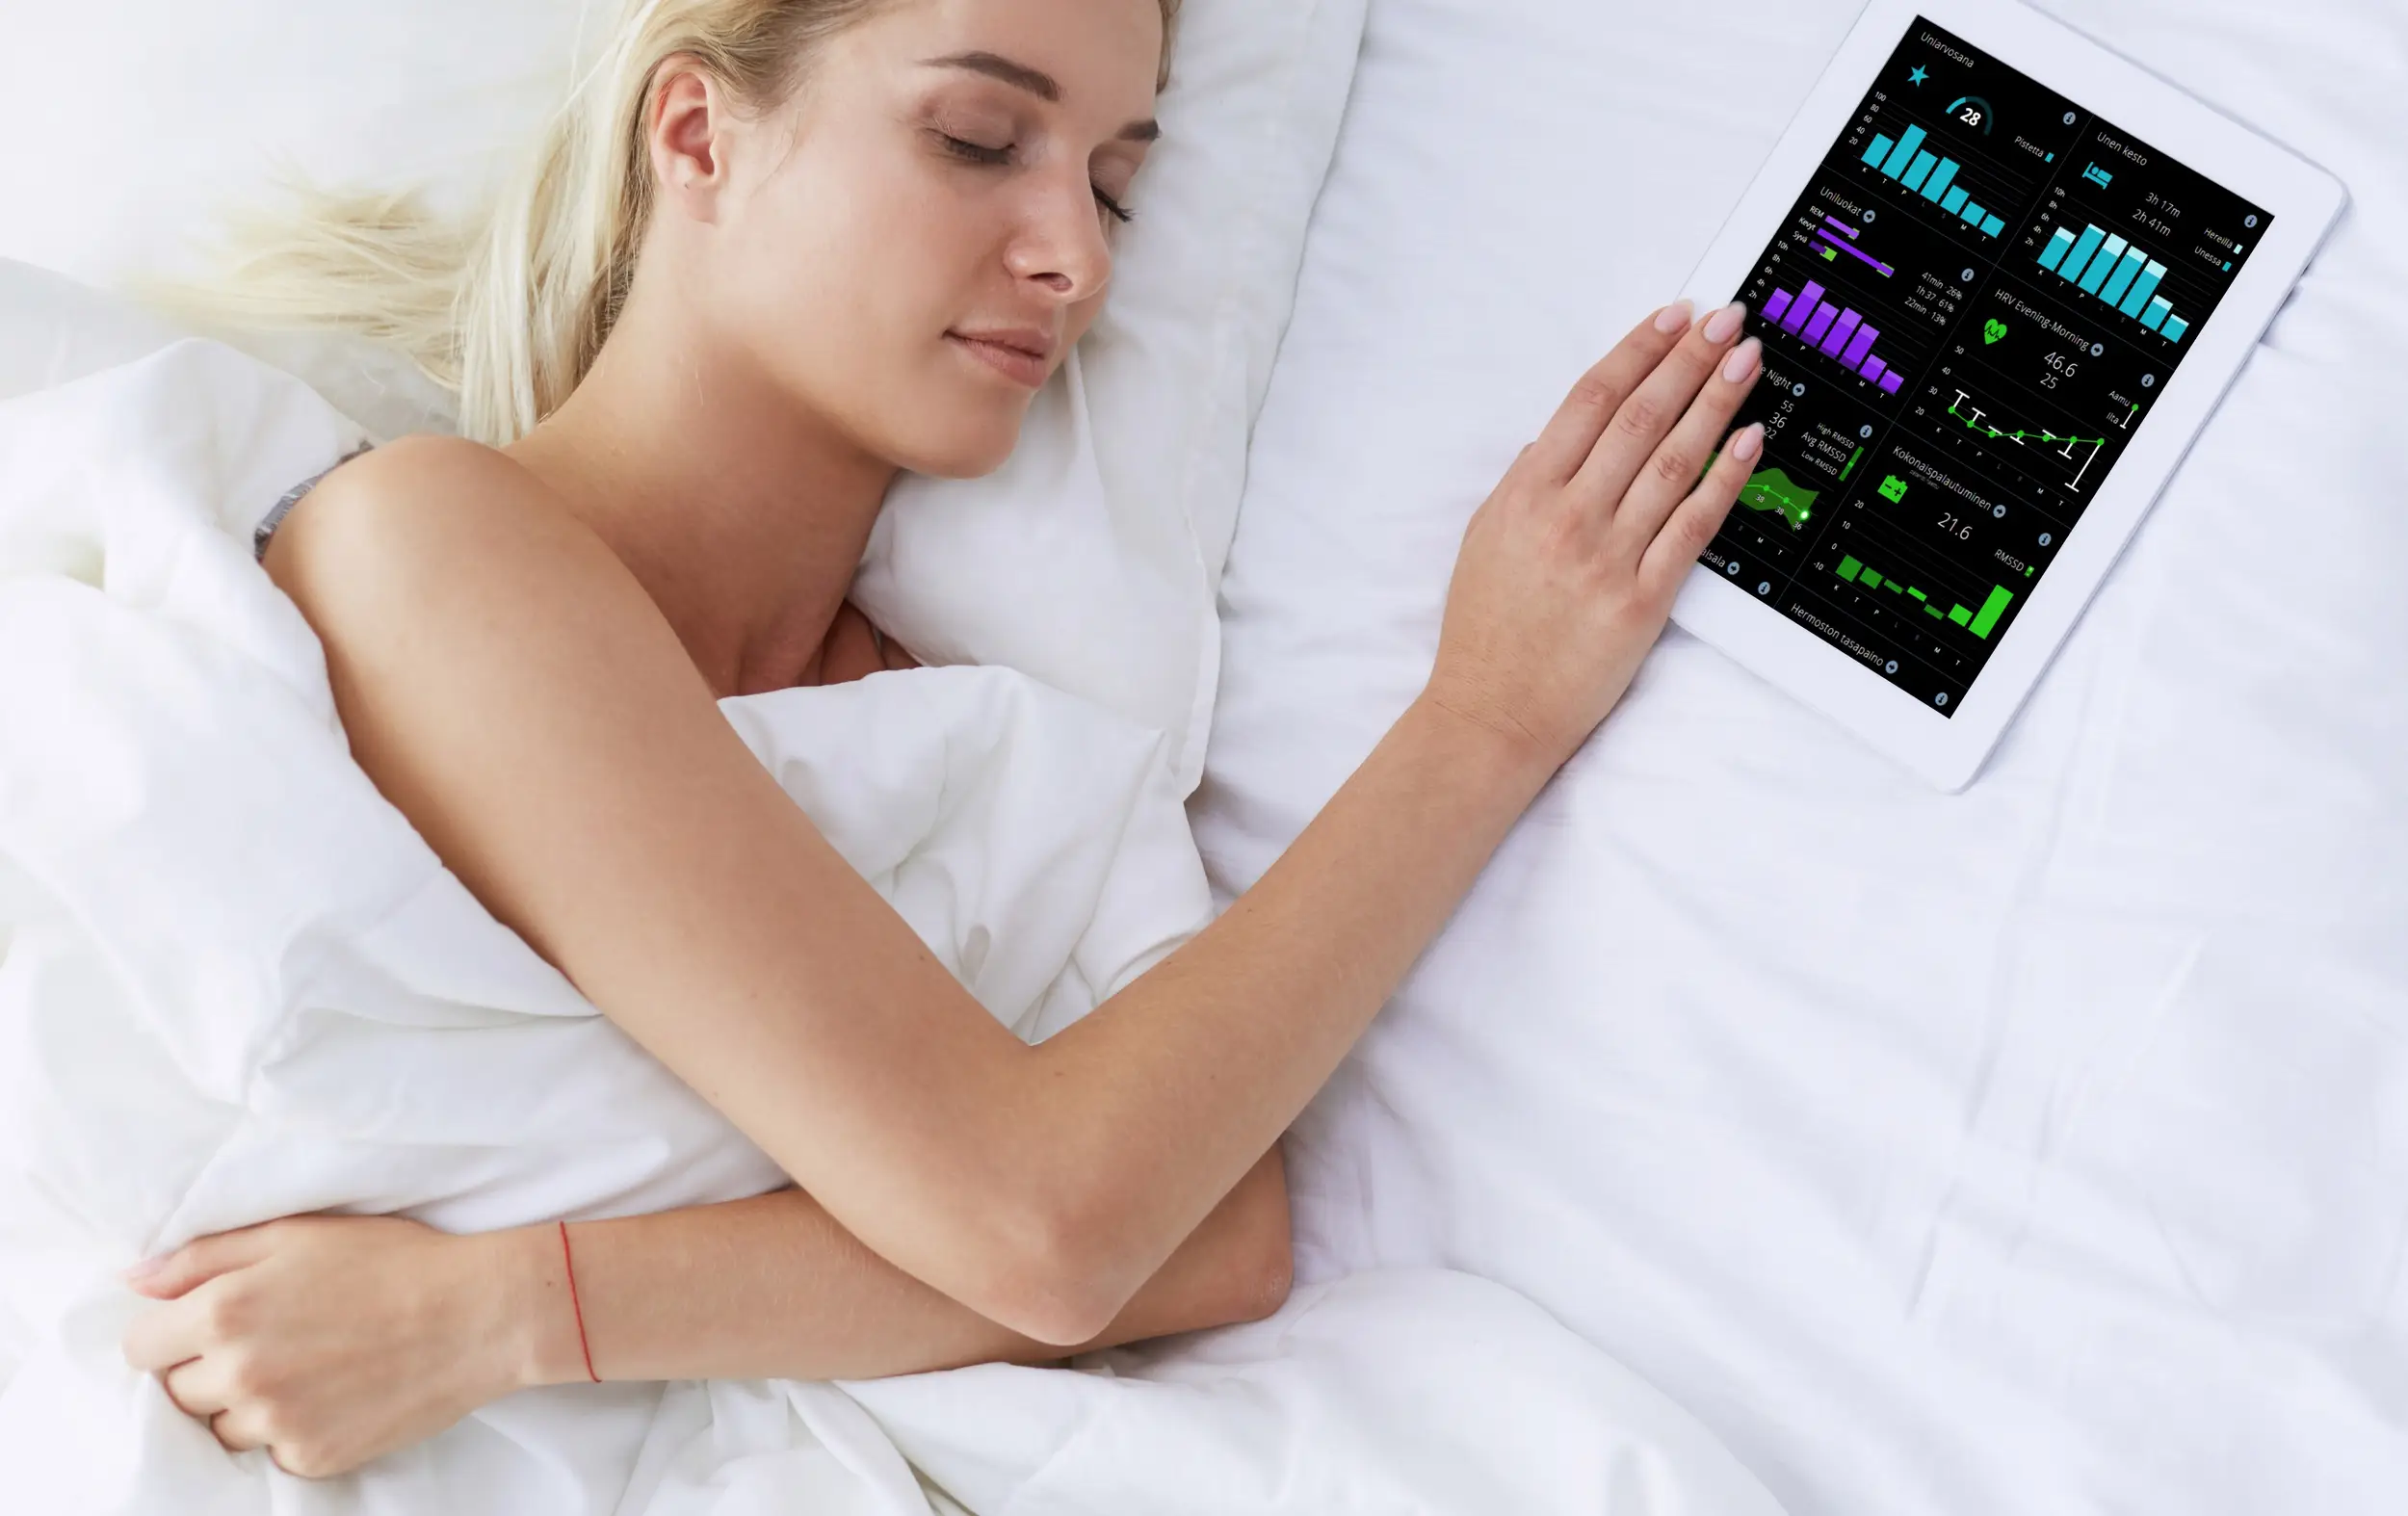 A woman sleeping in bed with an ipad in her hand.